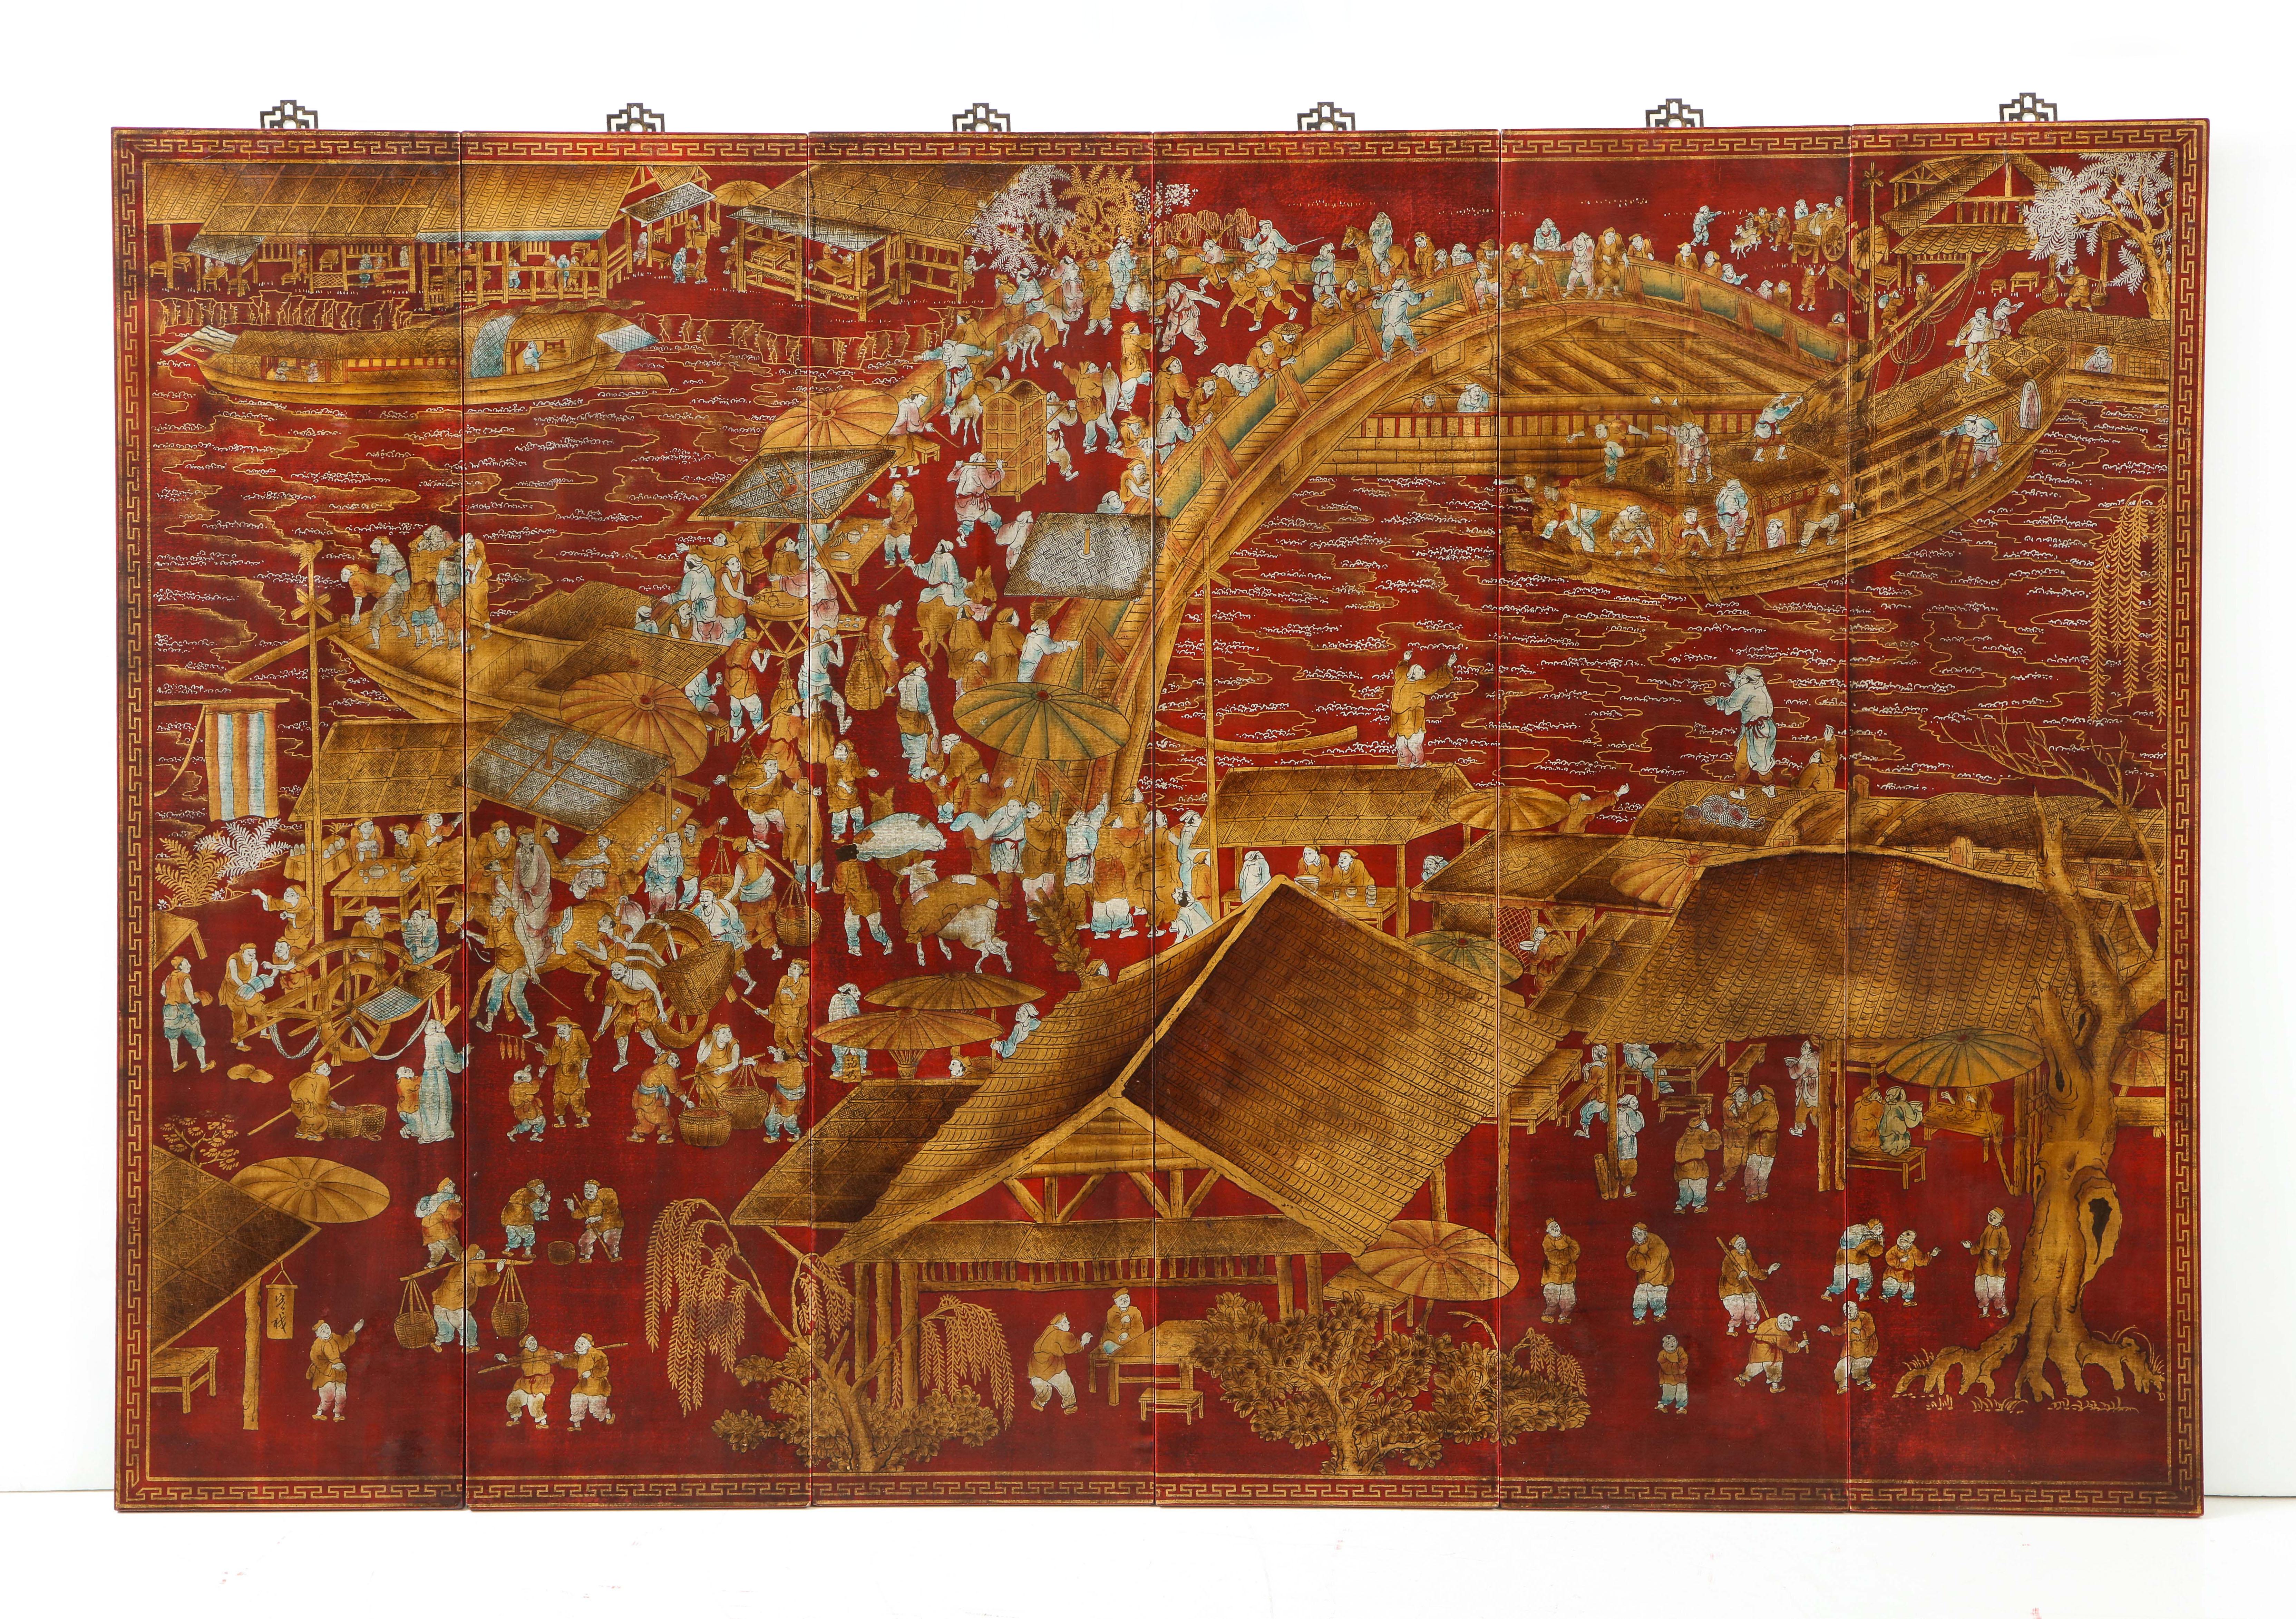 A set of six chinoiserie panels lacquered in a deep red with accents of gold and teal blue. This work of art depicts a lively scene and intricate detail. Each panel could stand on its own - but together, they make up story. These would be a great